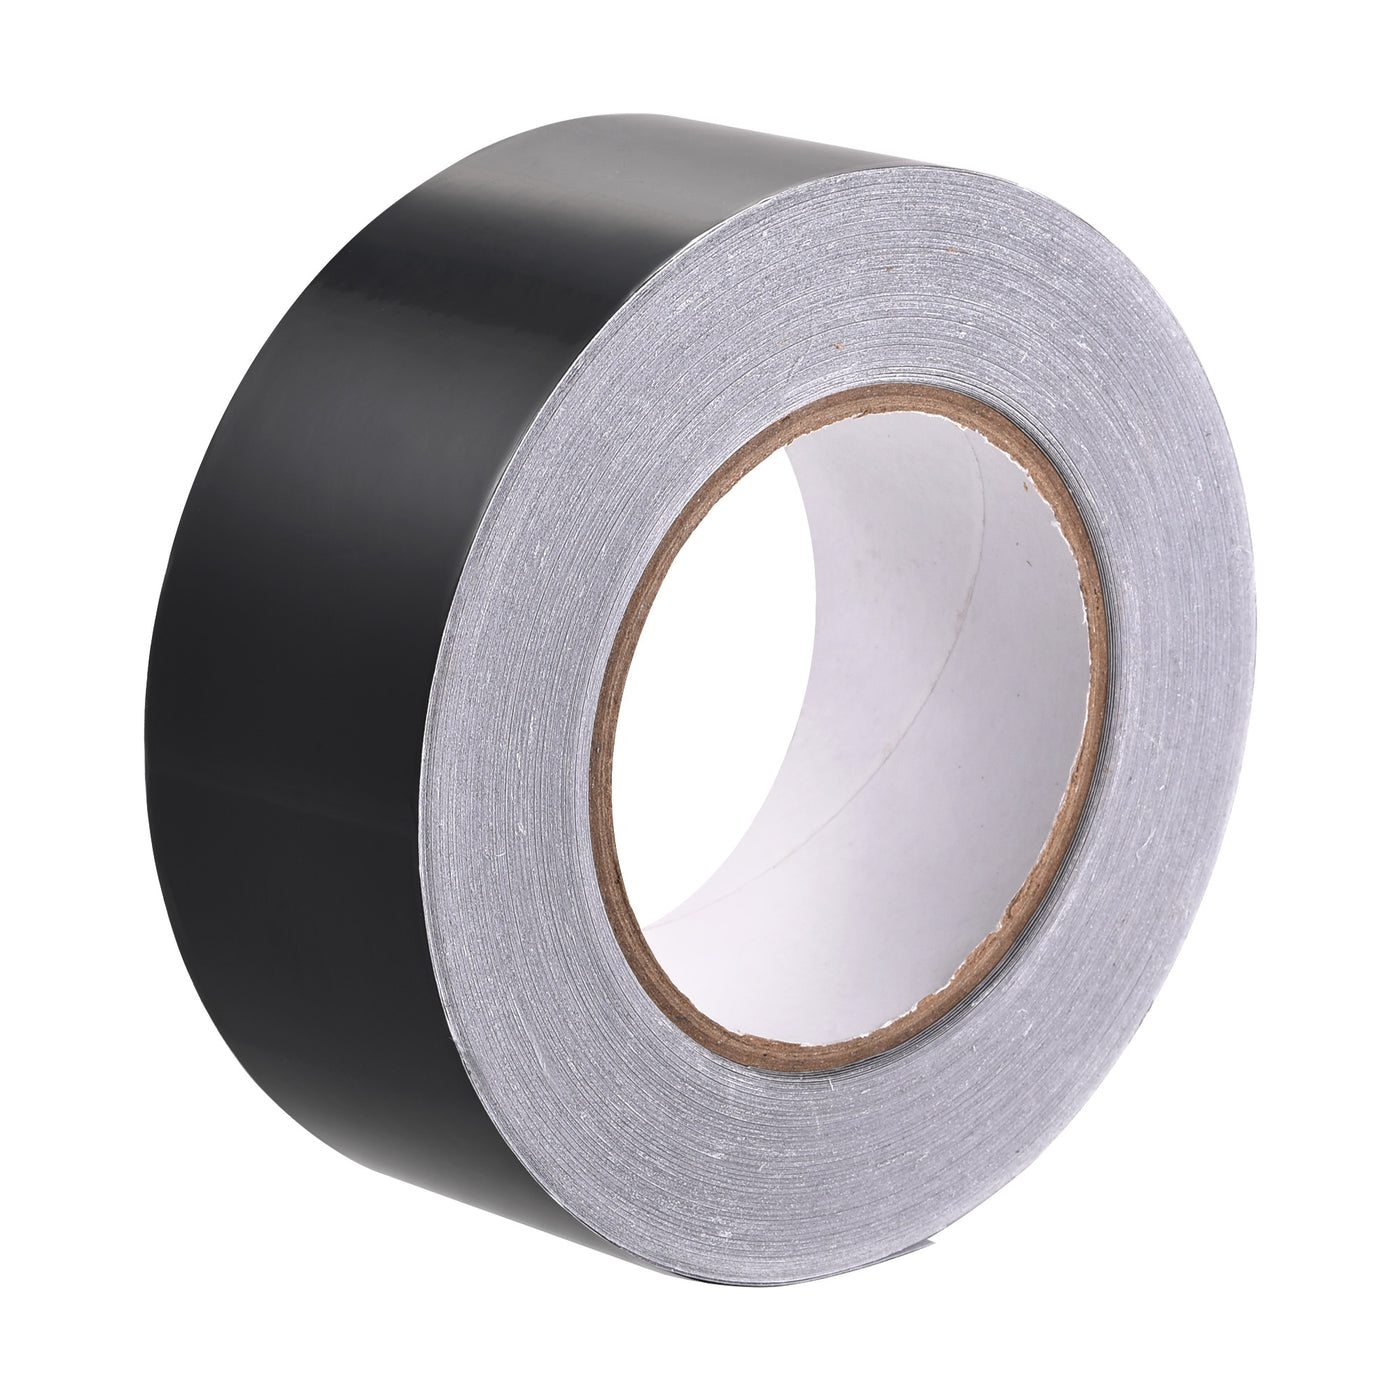 uxcell Uxcell Aluminum Foil Tape Black Matte Tape Non Reflective 50mmx50m/164ft for HVAC, Sealing, Patching Hot and Cold Air Ducts